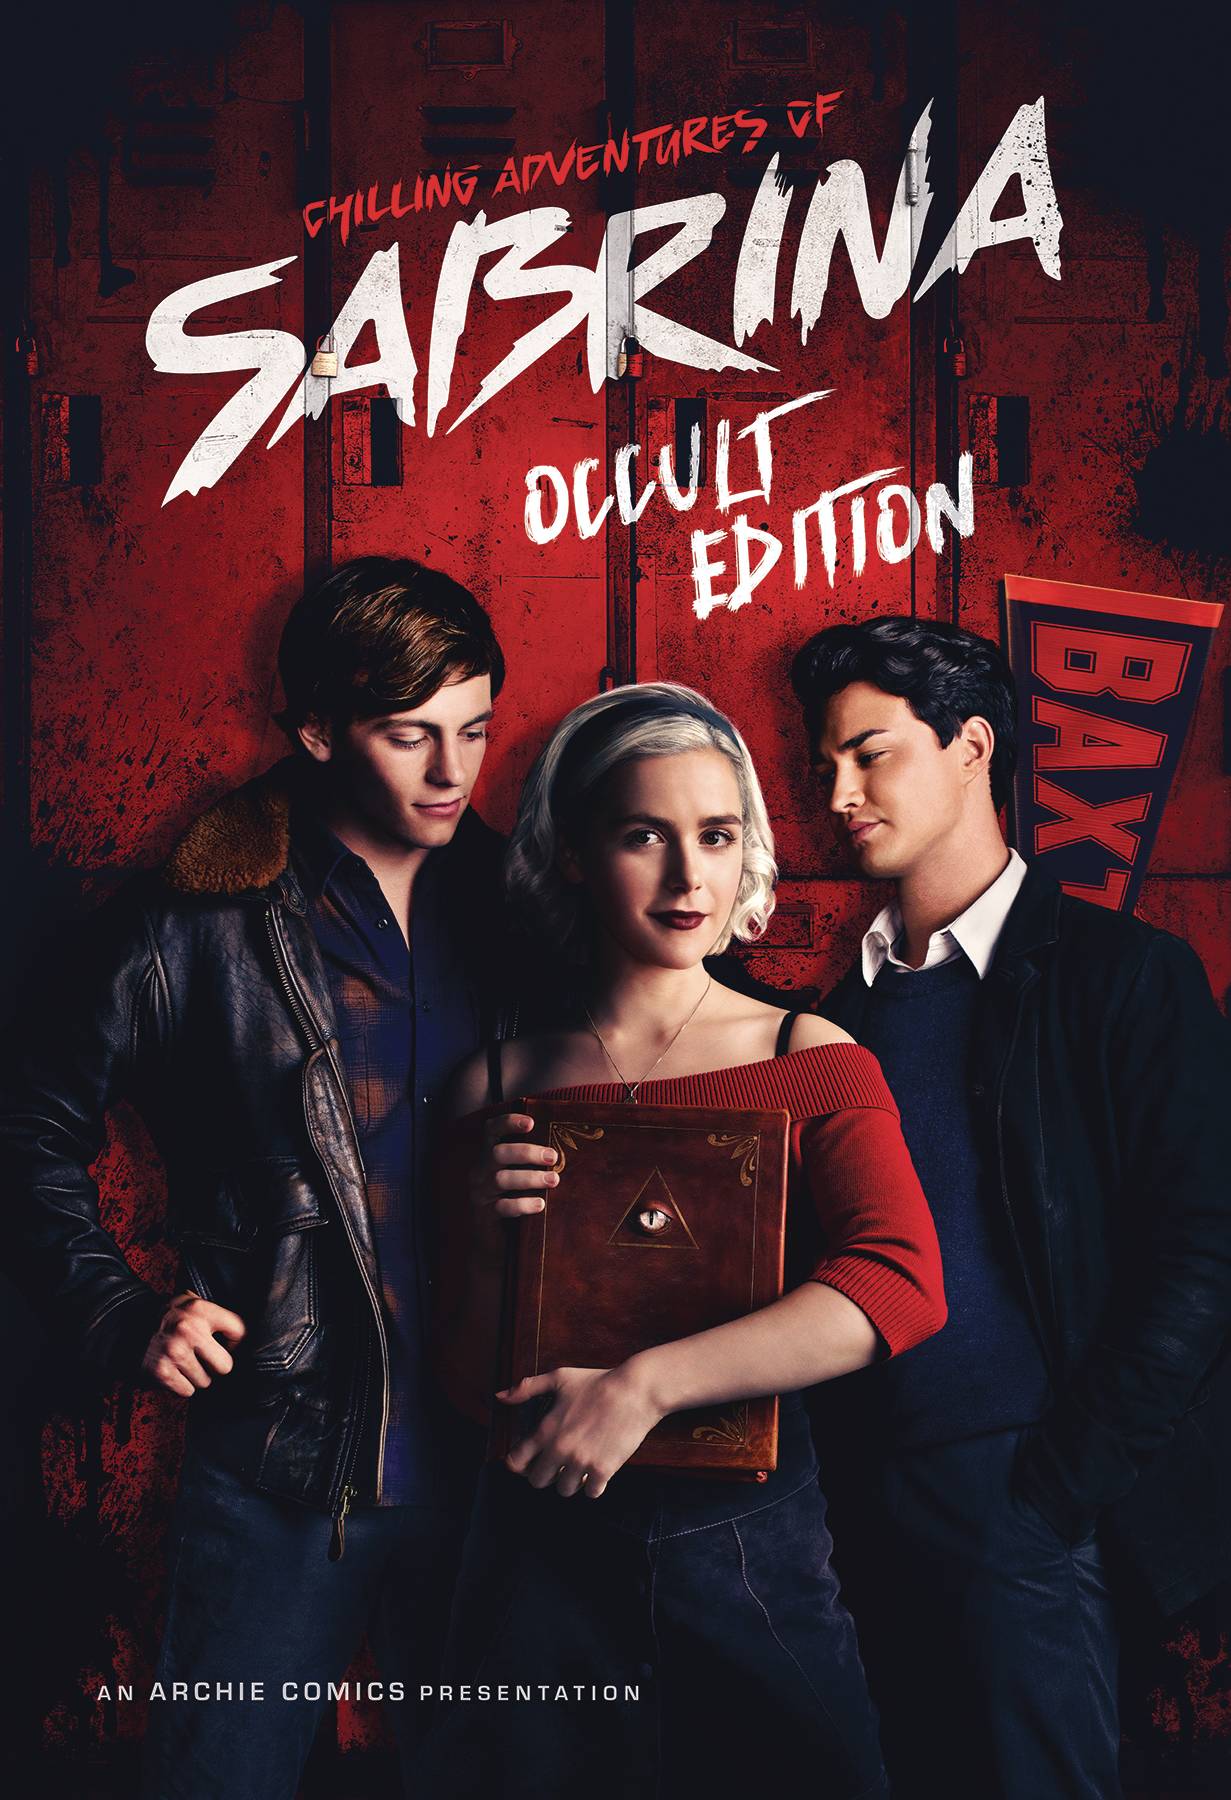 Chilling Adventures of Sabrina - Occult Edition HC